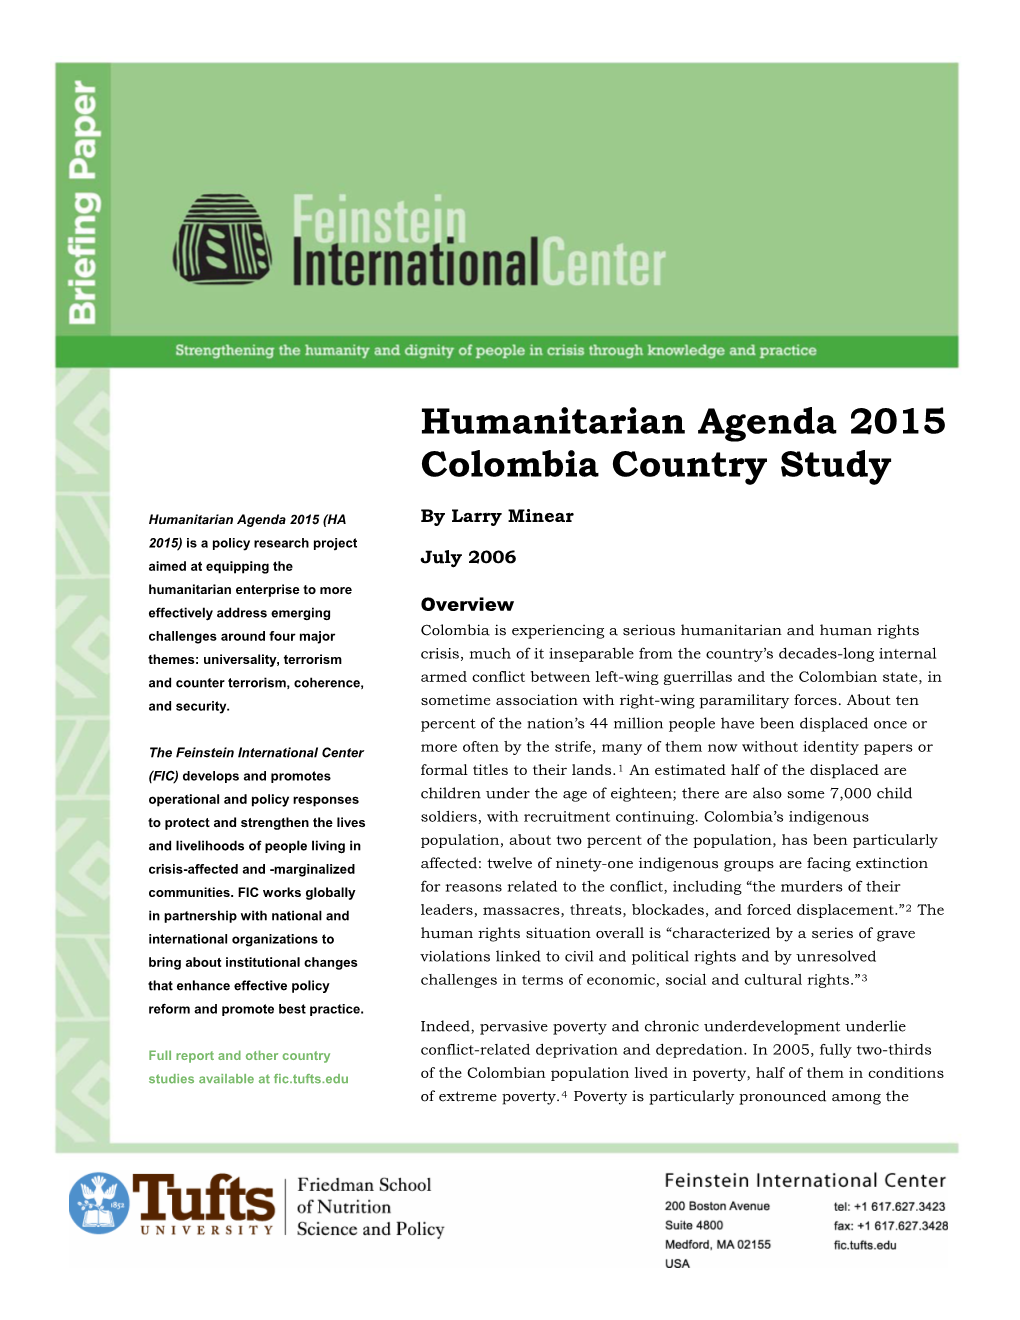 Humanitarian Agenda 2015 Colombia Country Study